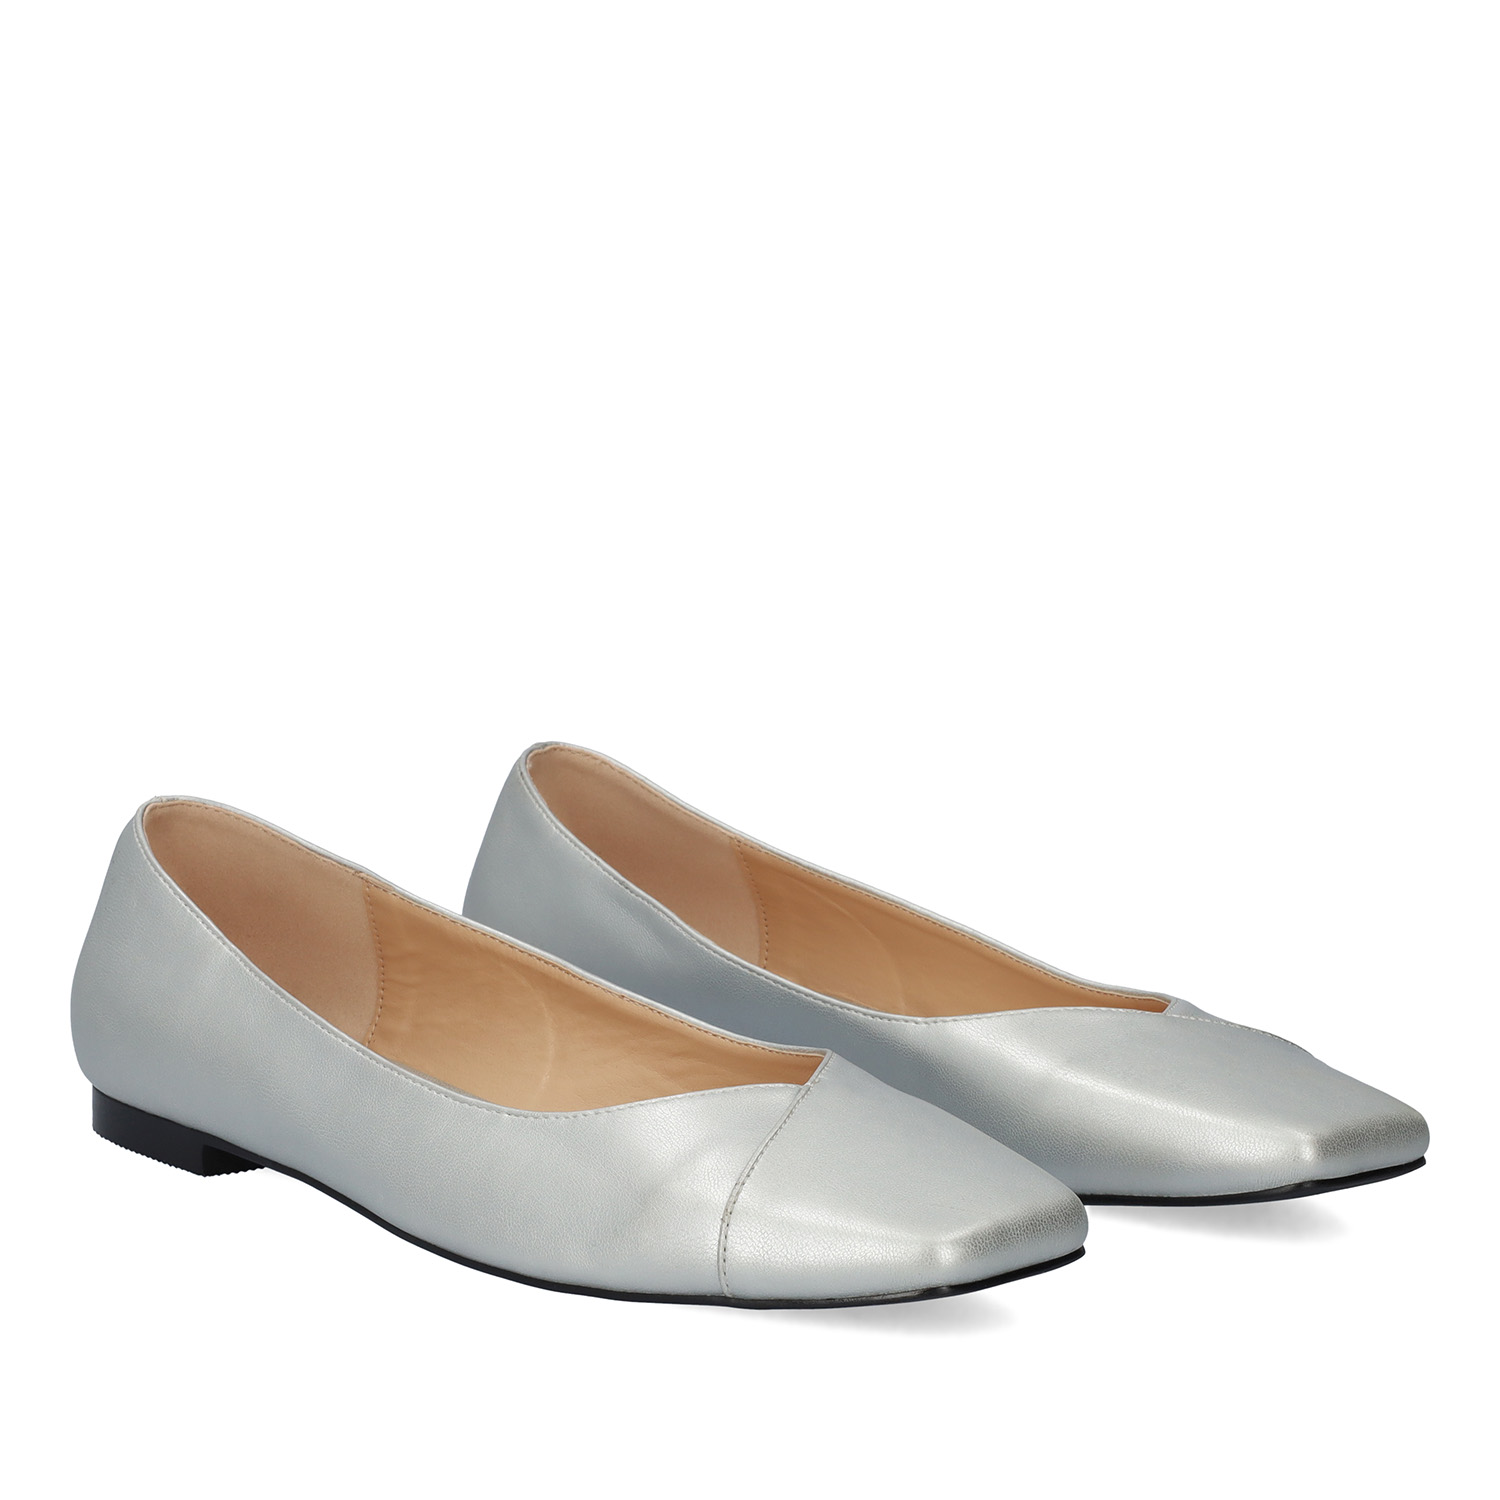 Silver coloured faux leather ballerina 